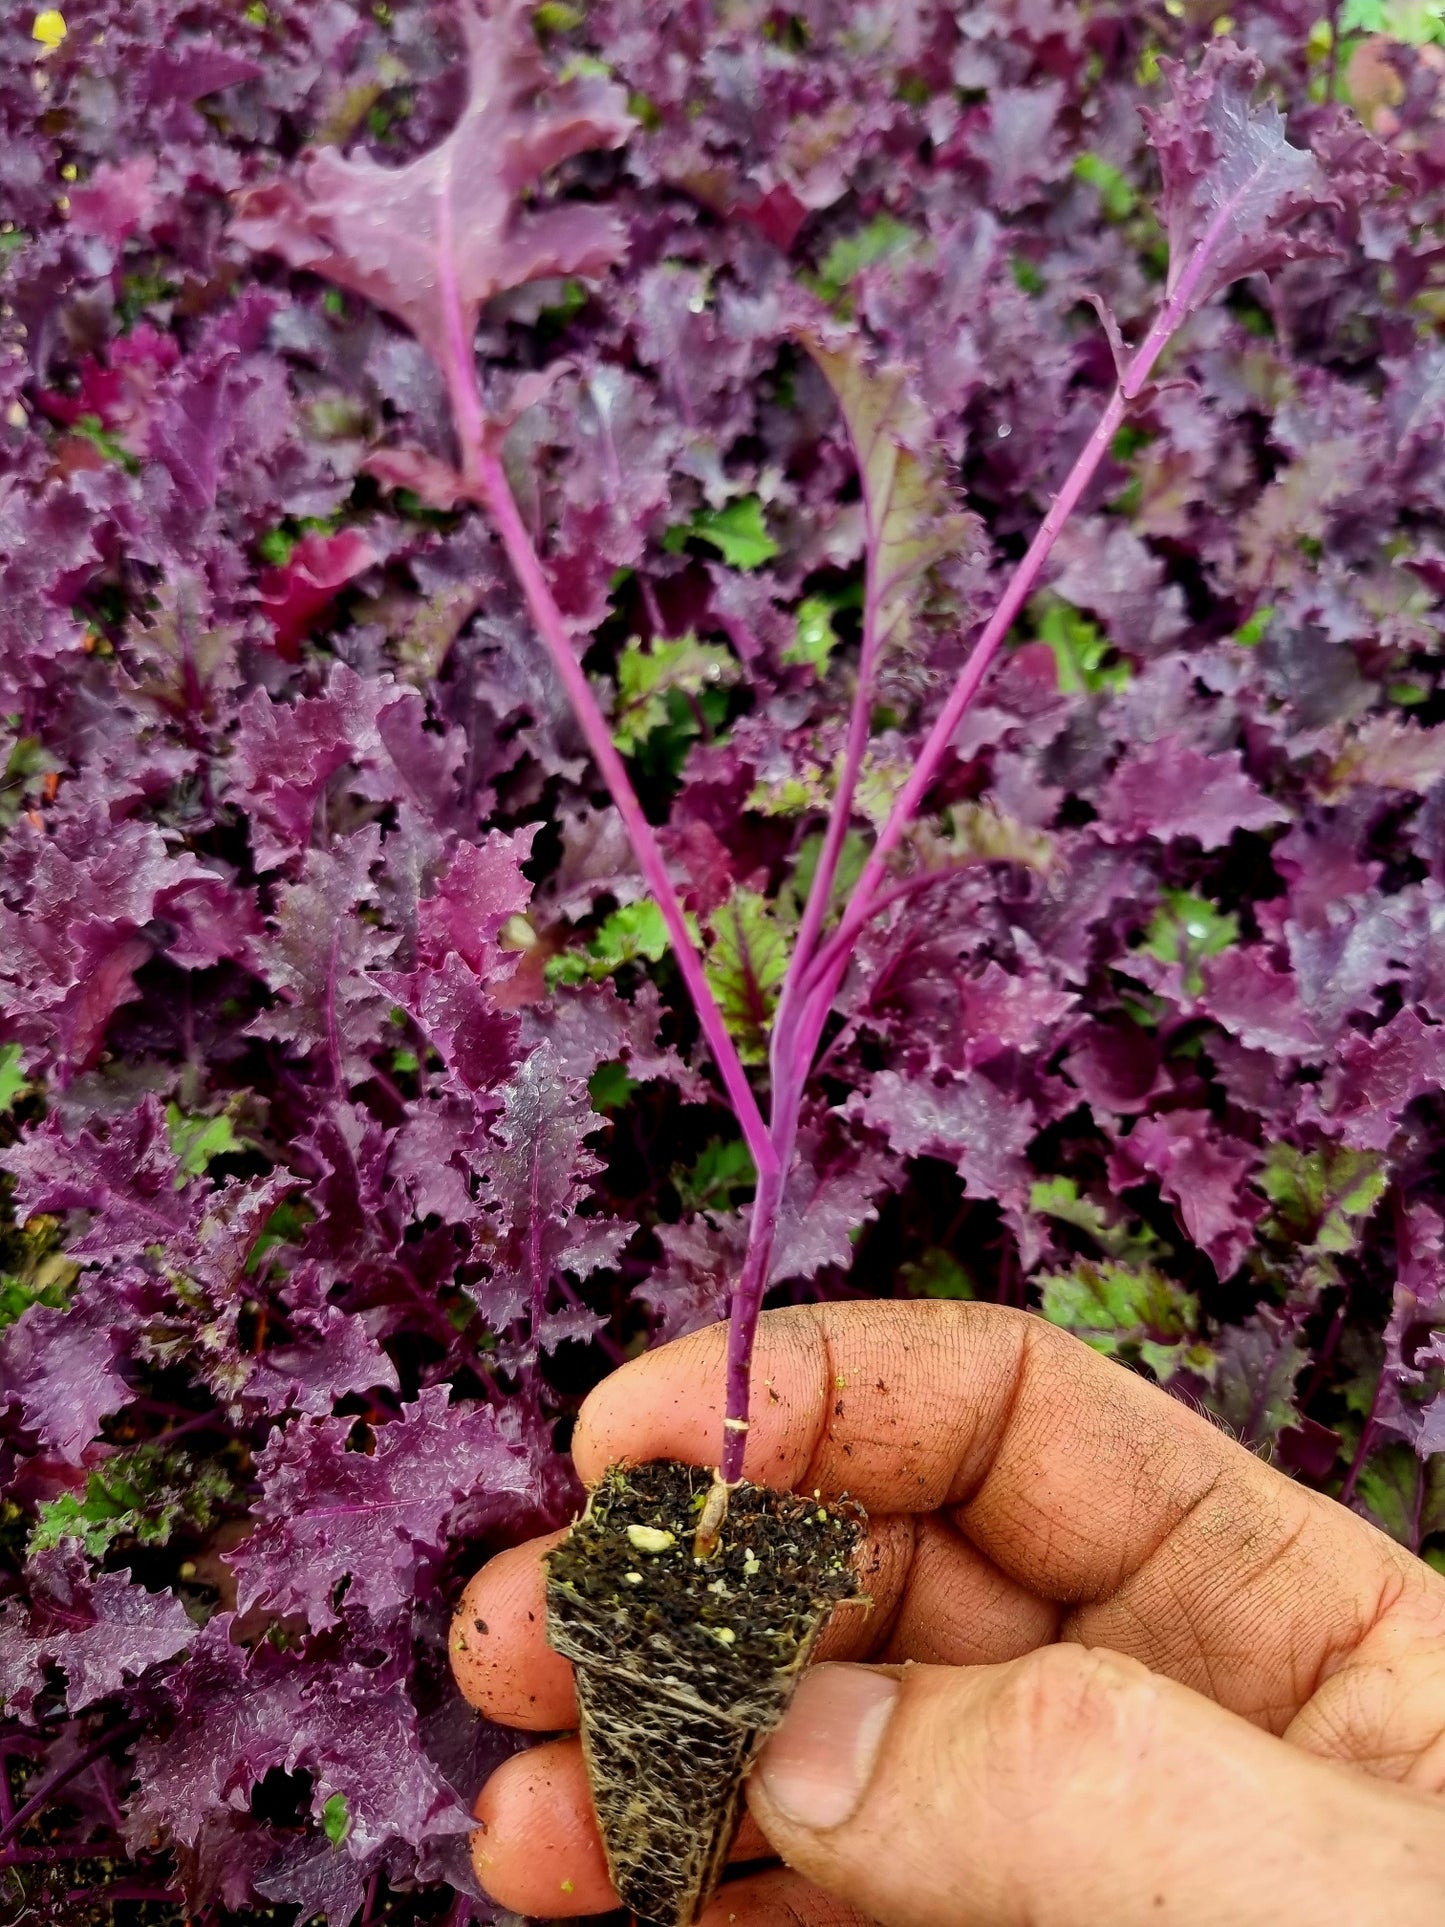 Red Kale Plug Plants "Grow Your Own" Vegetables **Letterbox Friendly**